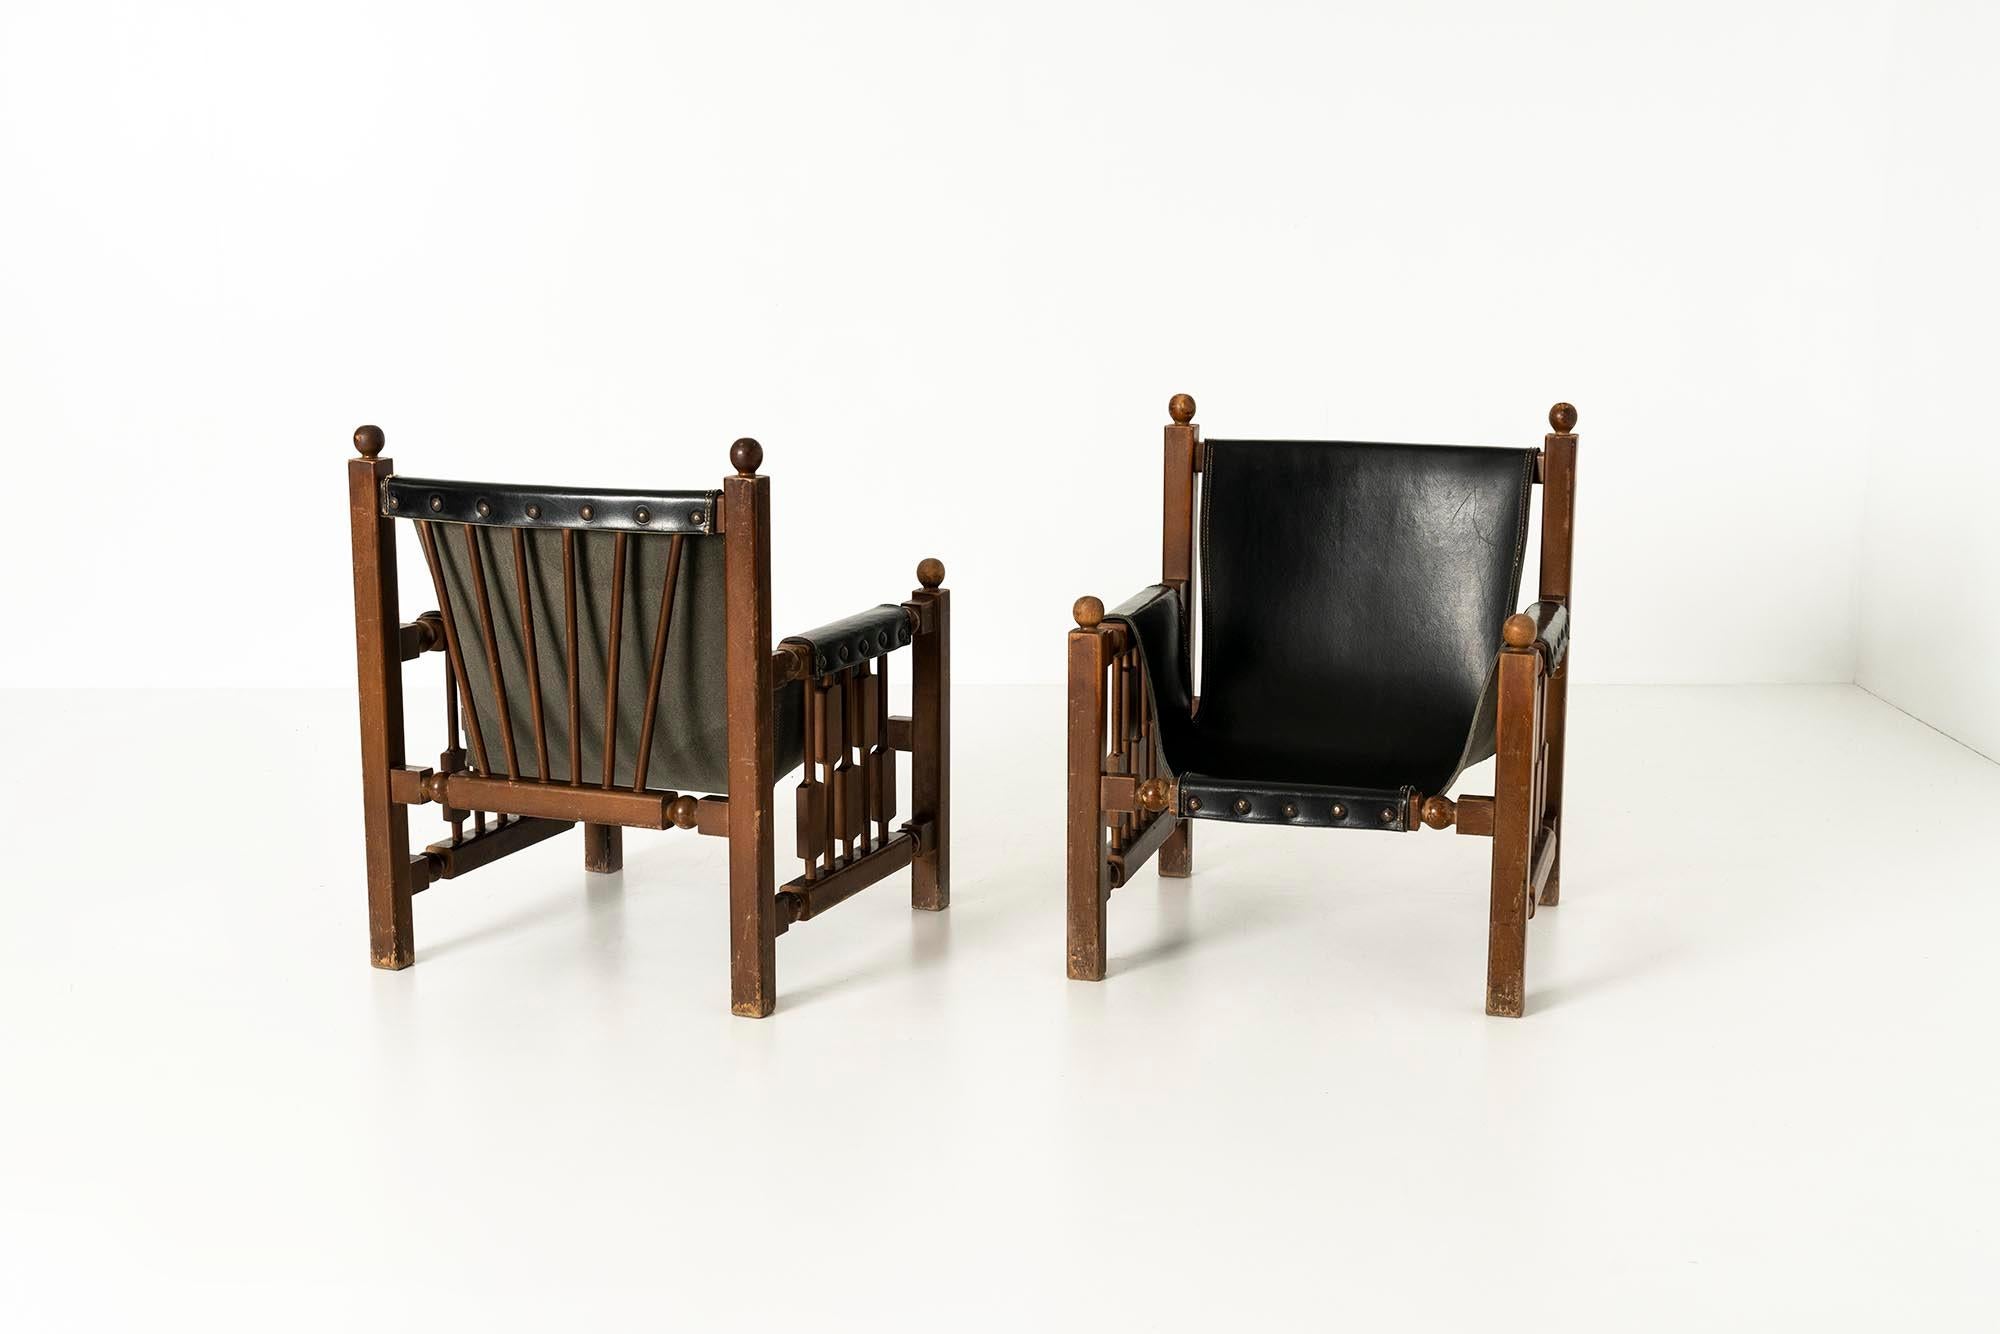 A set of two beautiful rustic brutalist oak chairs in faux leather upholstery in the style of Charles Dudouyt from the 1950s. These lounge chairs carry a strong reminiscence of the style of Charles Dudouyt. The solid oak frame structure is